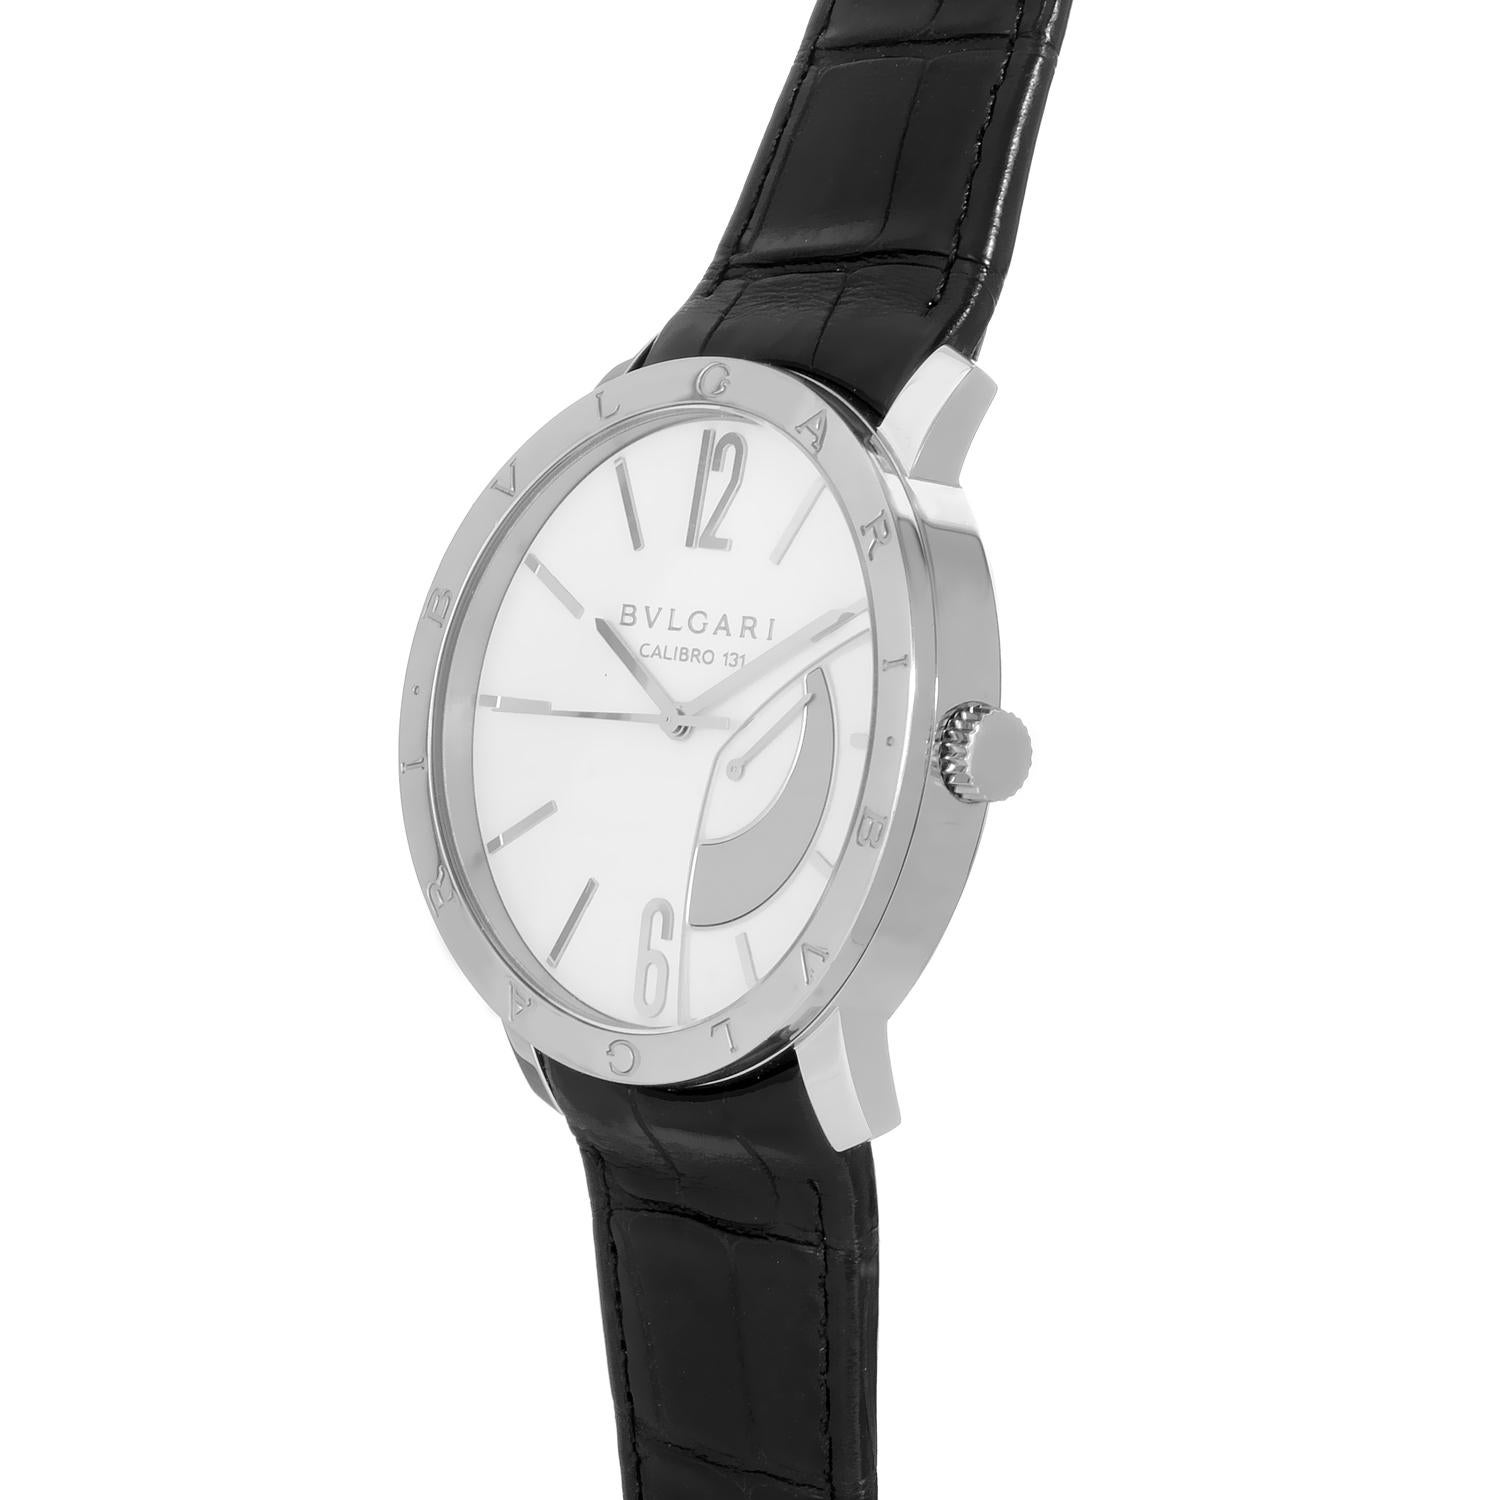 A seemingly classic design given an attractive contemporary twist, this exquisite timepiece from Bvlgari not only offers a highly attractive look, but also the irresistible appeal of a mechanical watch for true connoisseurs of the art of